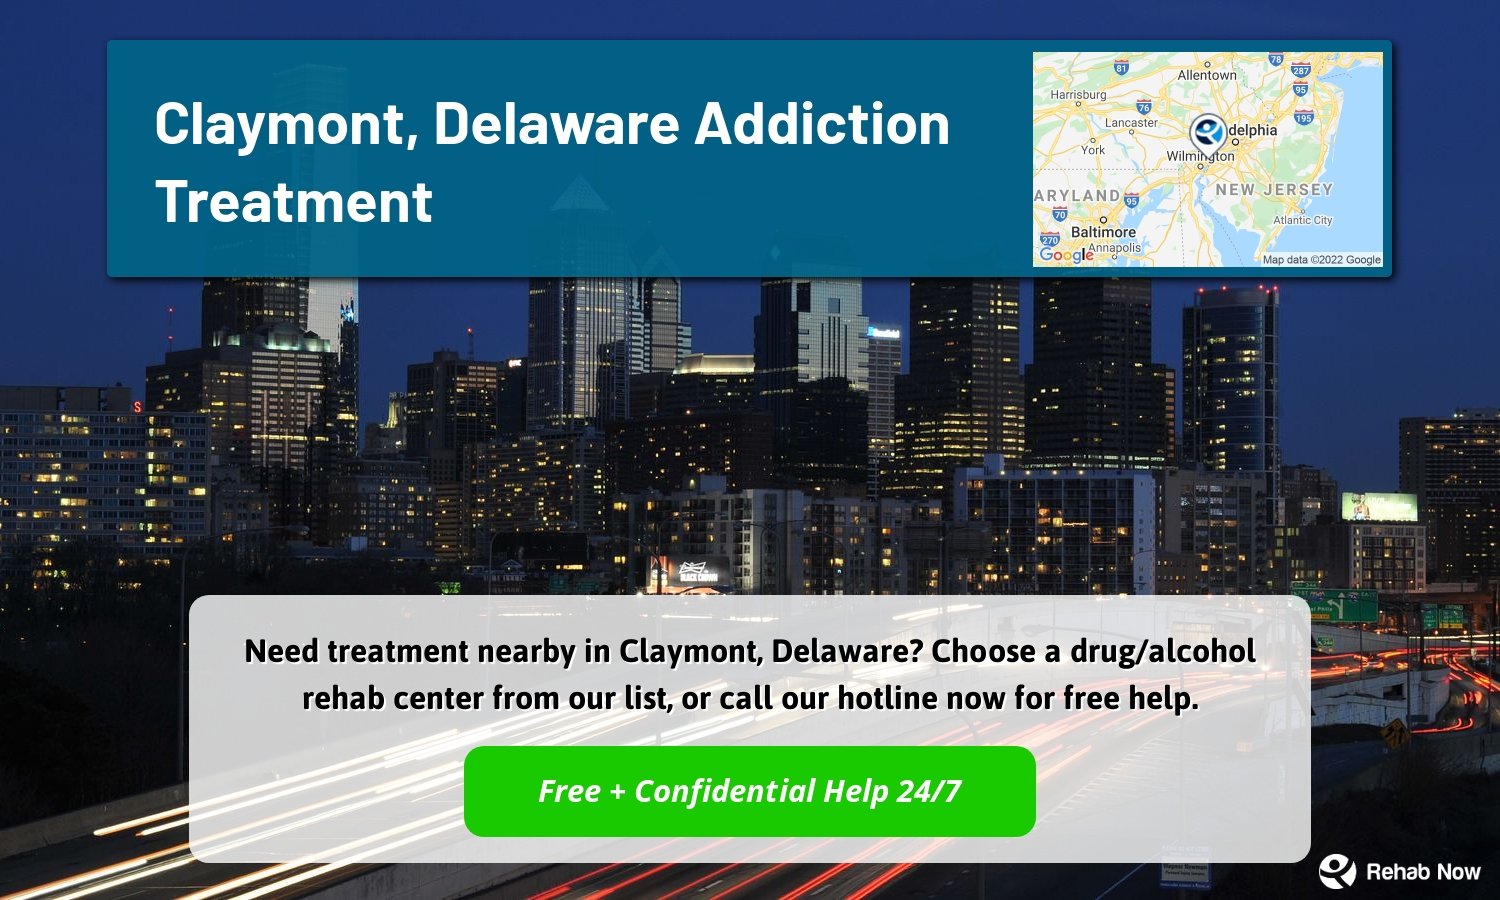 Need treatment nearby in Claymont, Delaware? Choose a drug/alcohol rehab center from our list, or call our hotline now for free help.